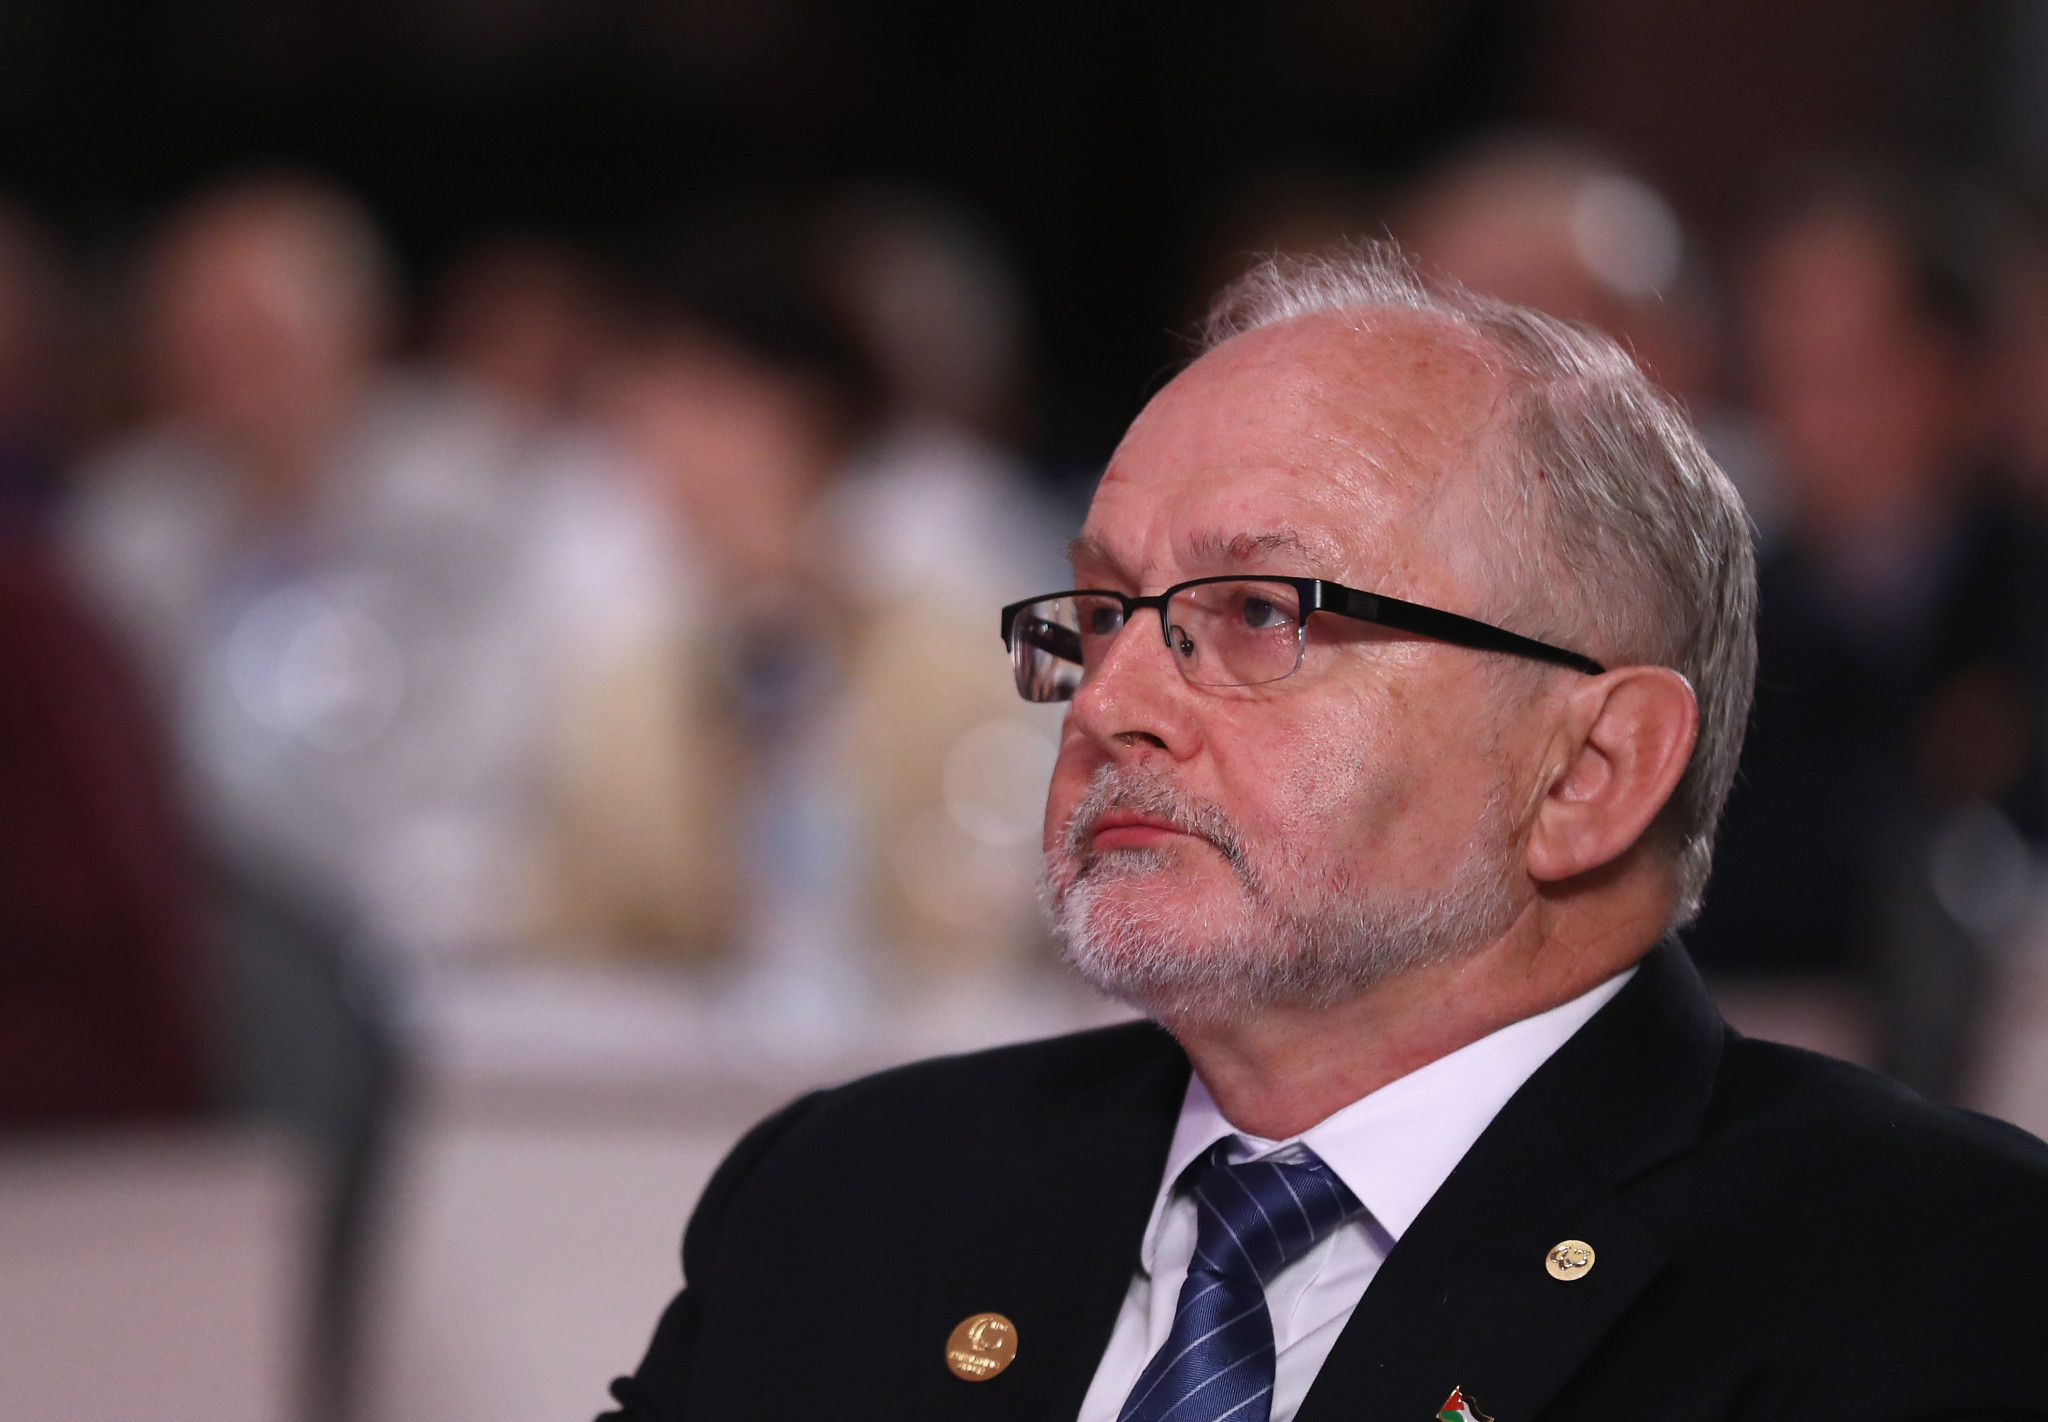 Sir Philip Craven has been removed from the list of IOC members ©Getty Images